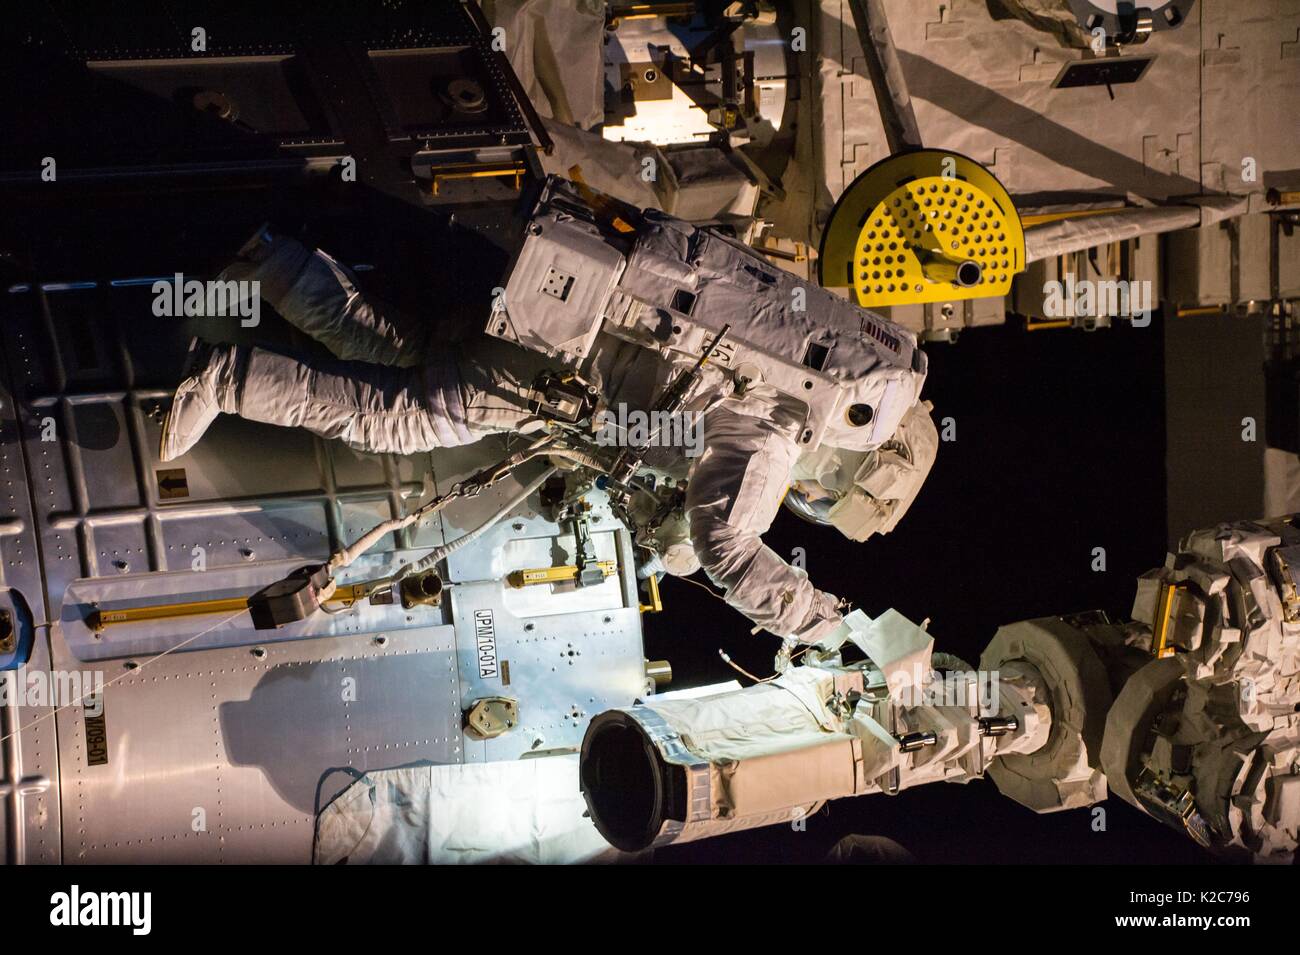 NASA International Space Station Expedition 51 prime crew member American astronaut Jack Fischer works on the outside of the ISS Japanese Kibo Laboratory module during an EVA spacewalk May 12, 2017 in Earth orbit. Stock Photo